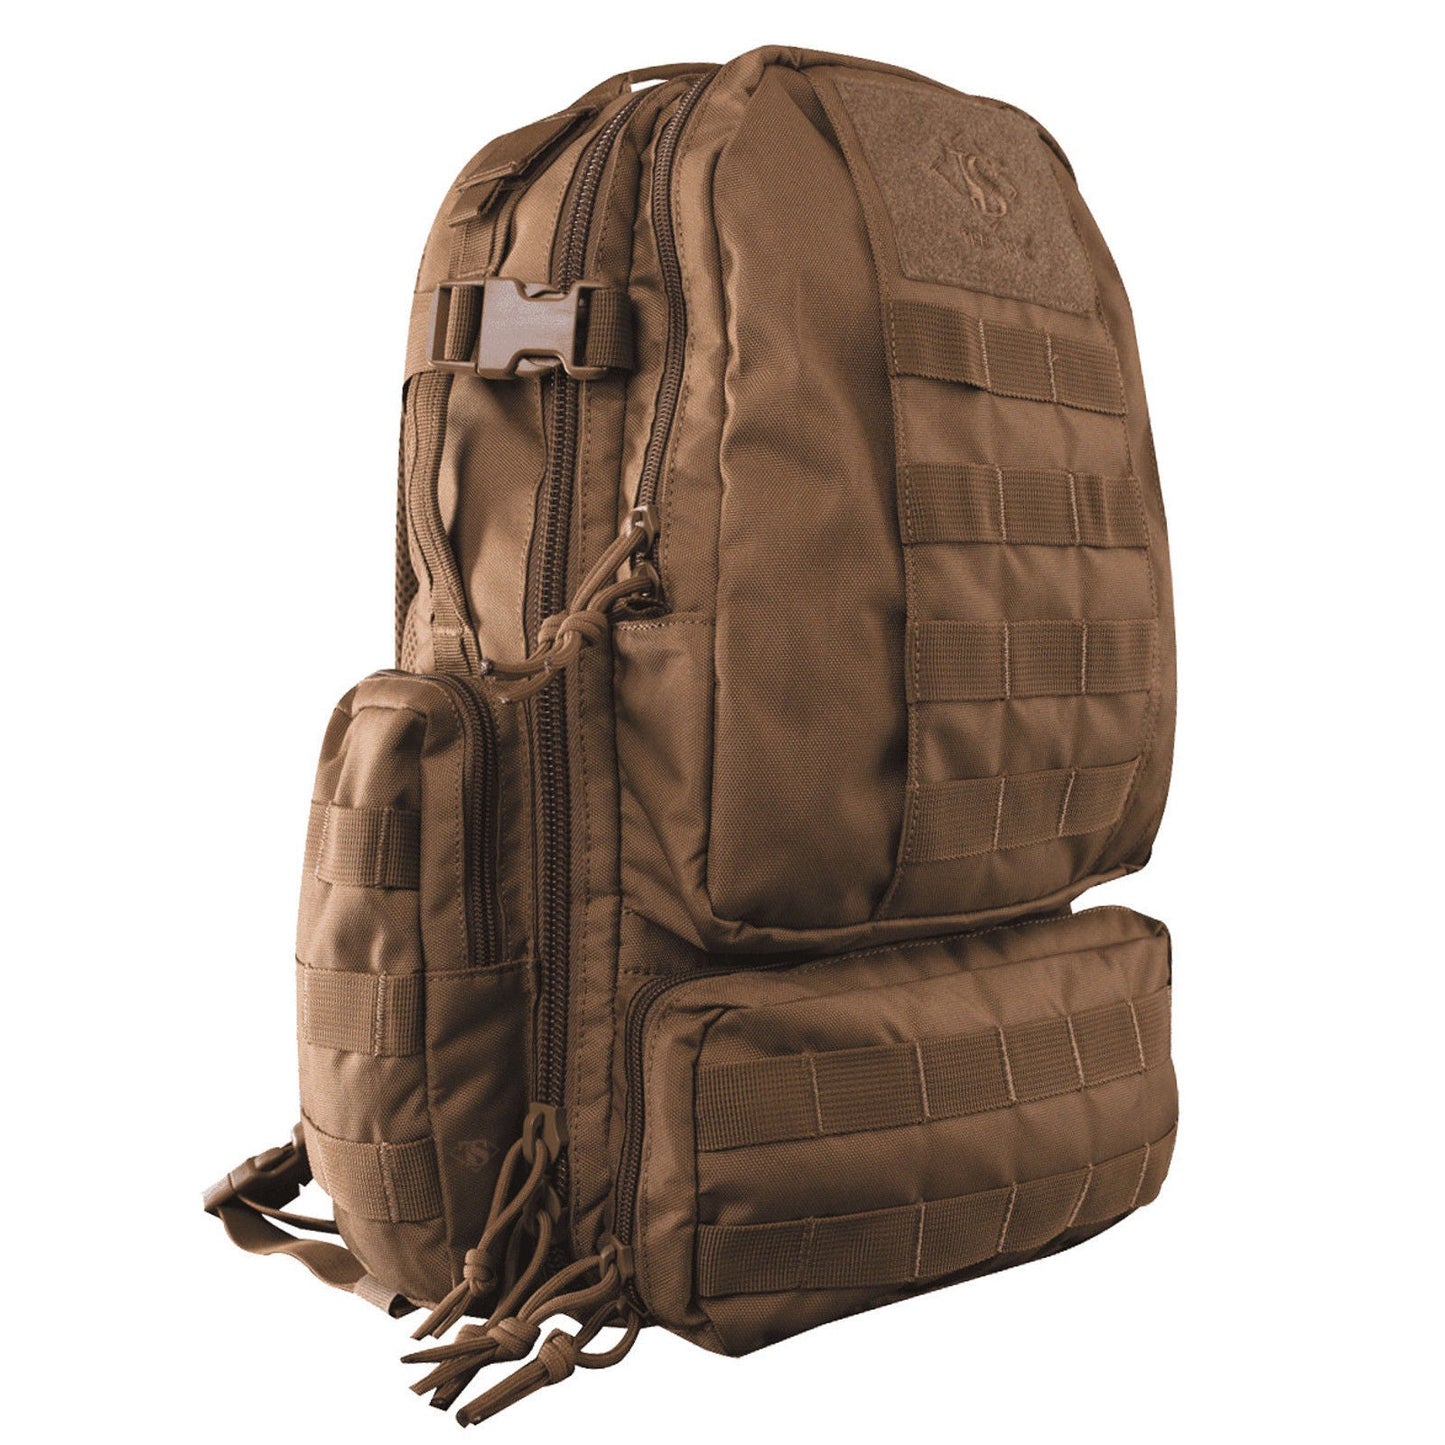 Tru-Spec Circadian Backpack - Everyday Tactical Backpack With CCW Access